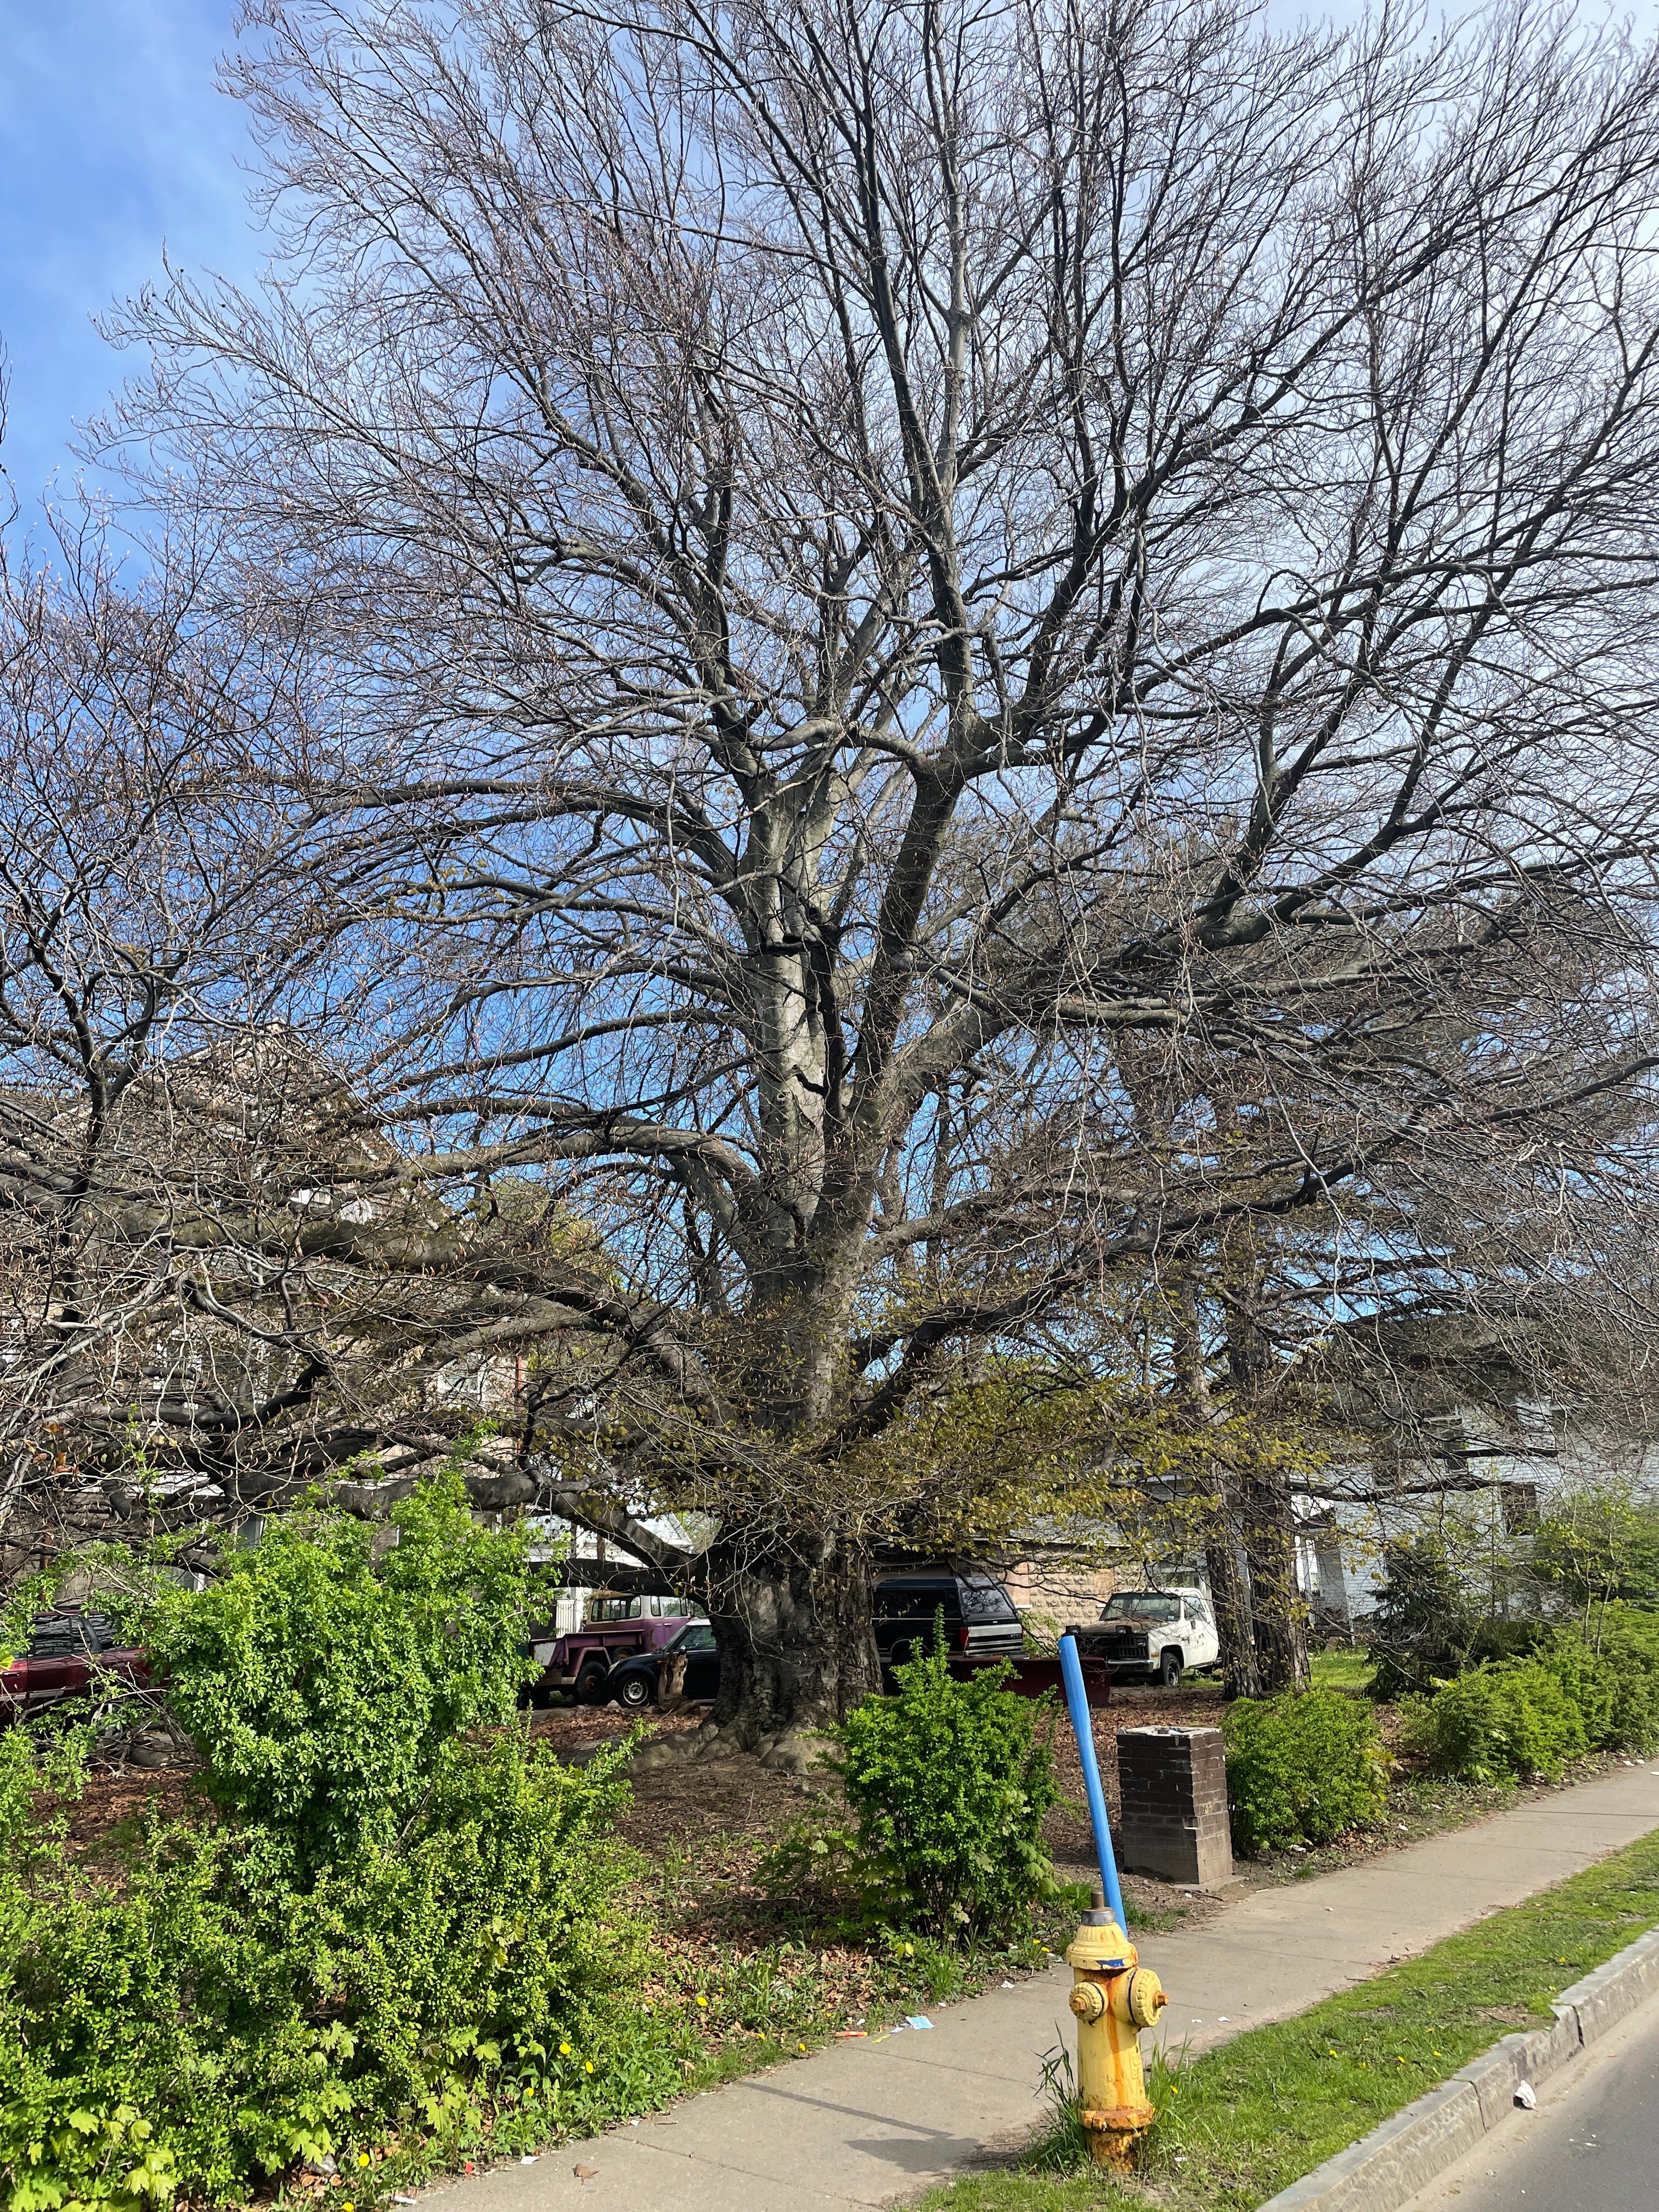 Tree Stories: Purple beech, 331 Glenwood Ave. "We used to have picnics under the tree. My sisters and brother would climb it ...but I was afraid," Angela Scott said.